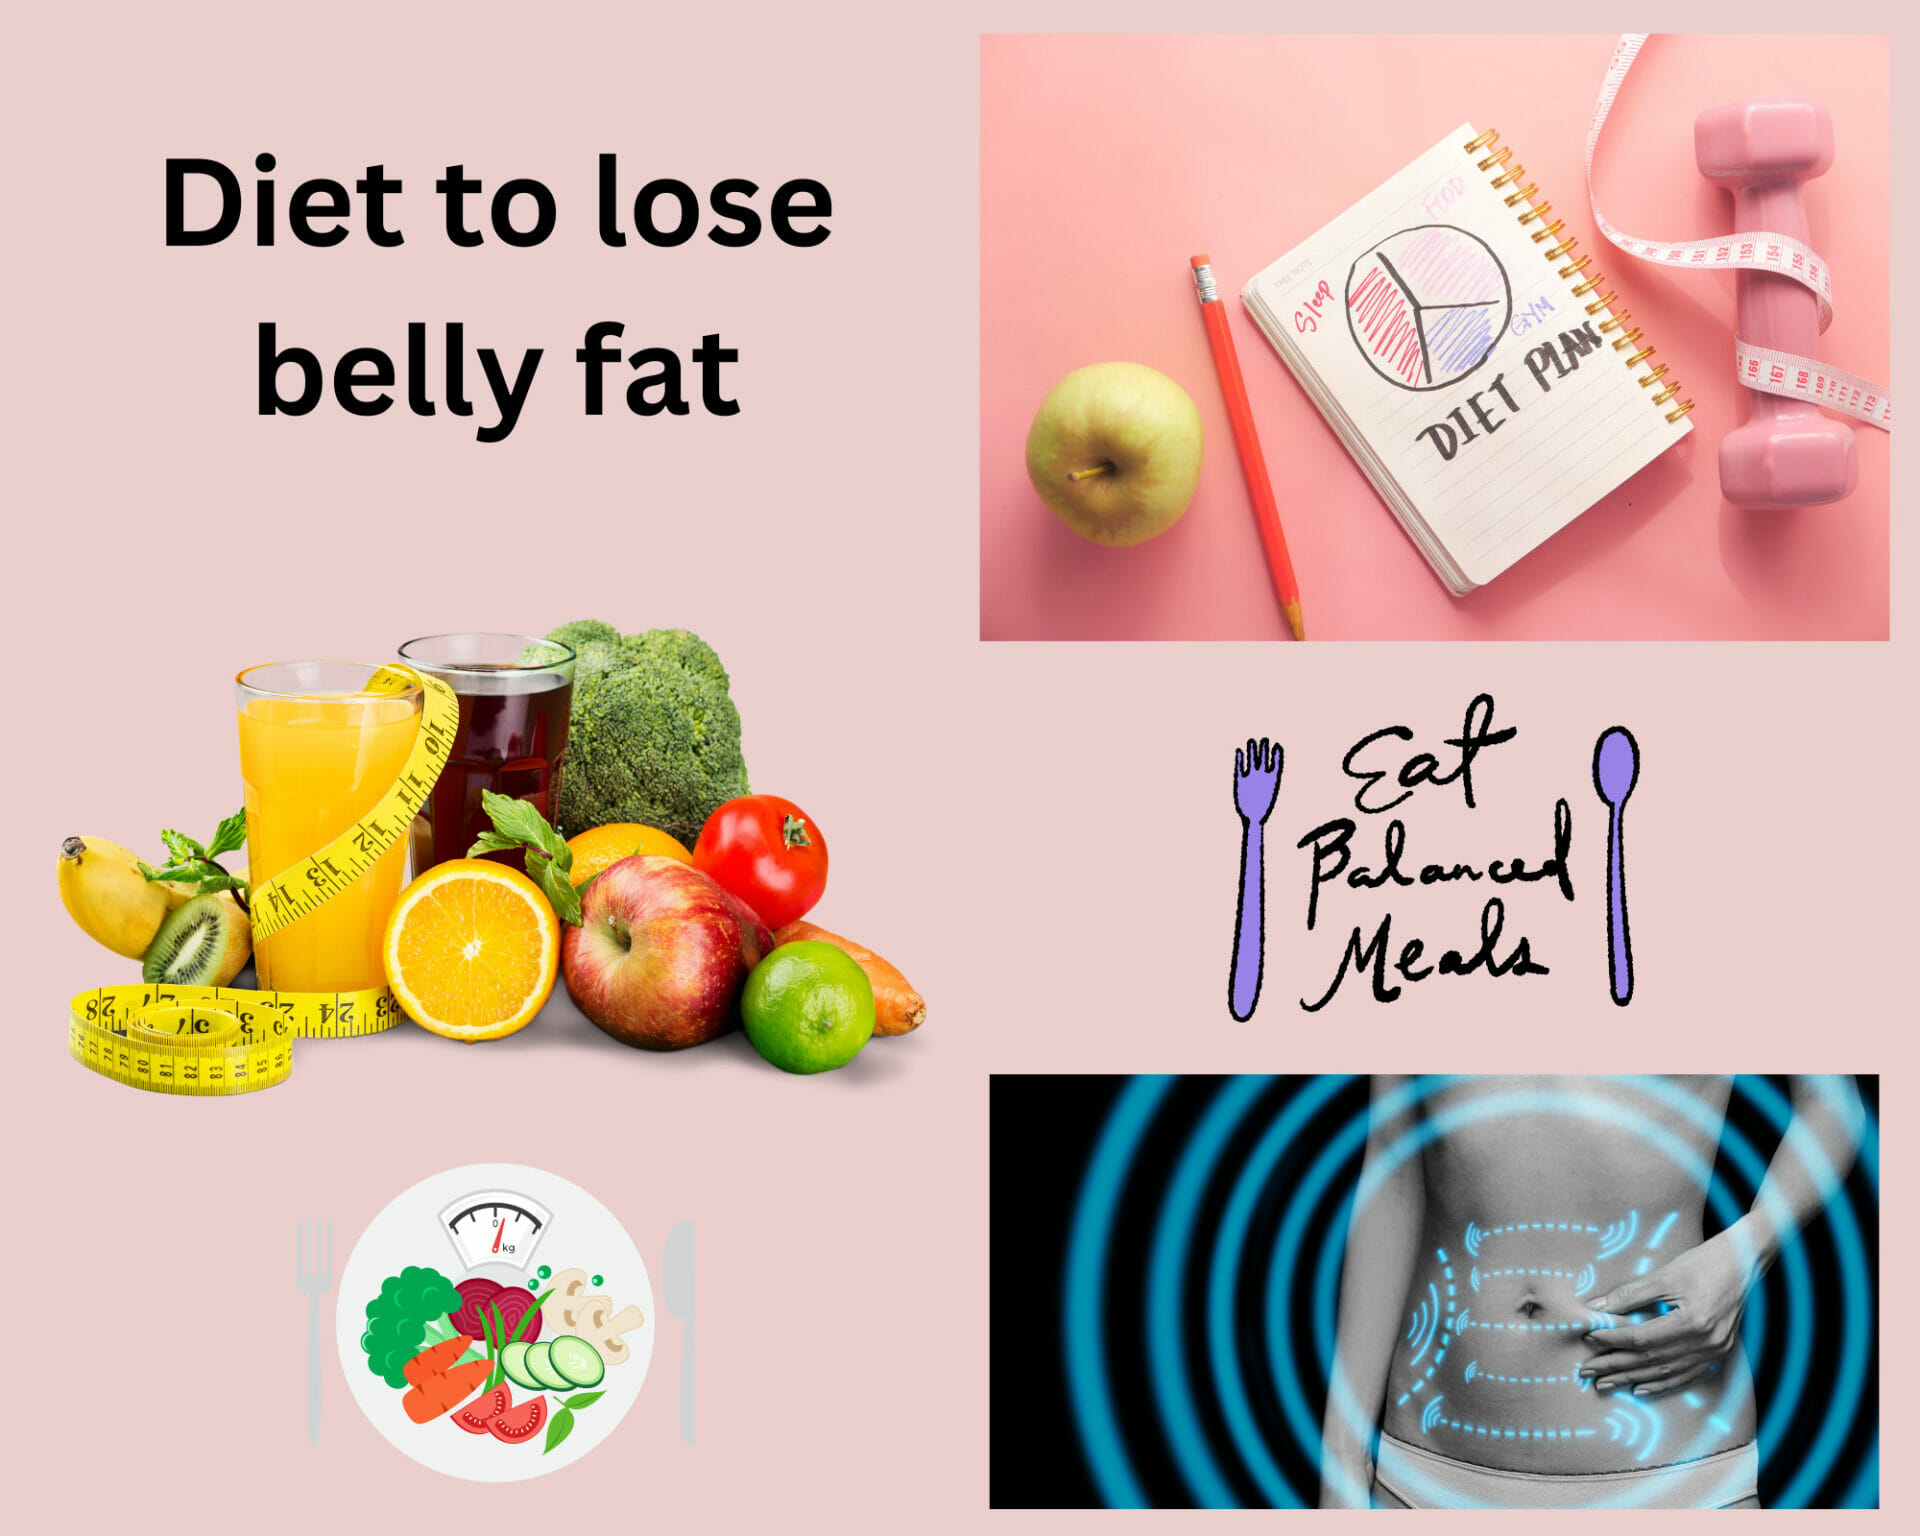 Diet to lose belly fat